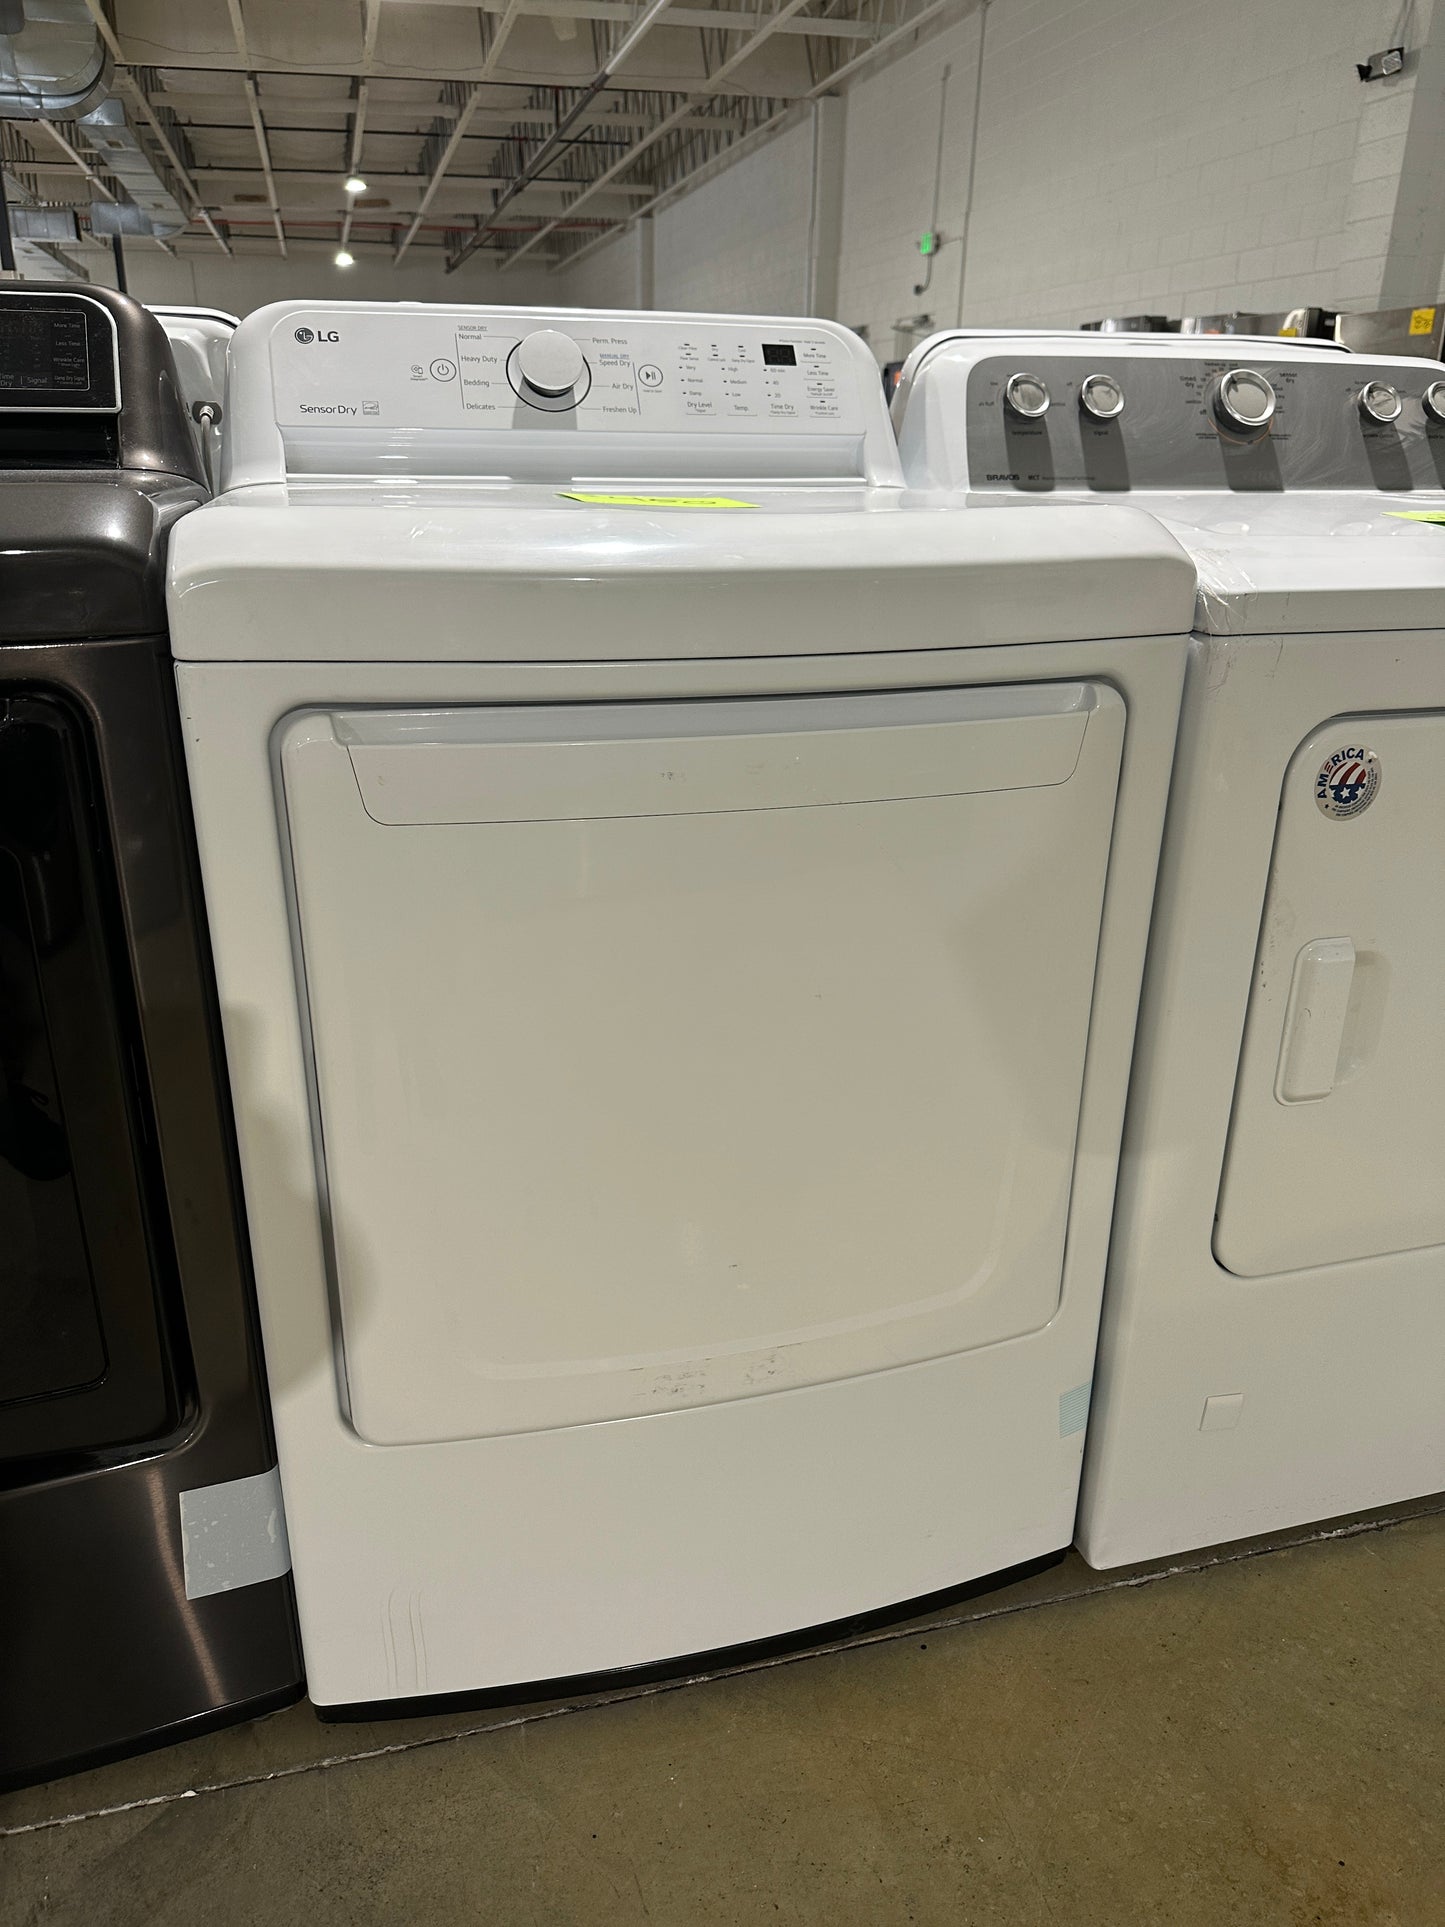 GREAT NEW LG GAS DRYER with SENSOR DRY - DRY11353S DLG7001W